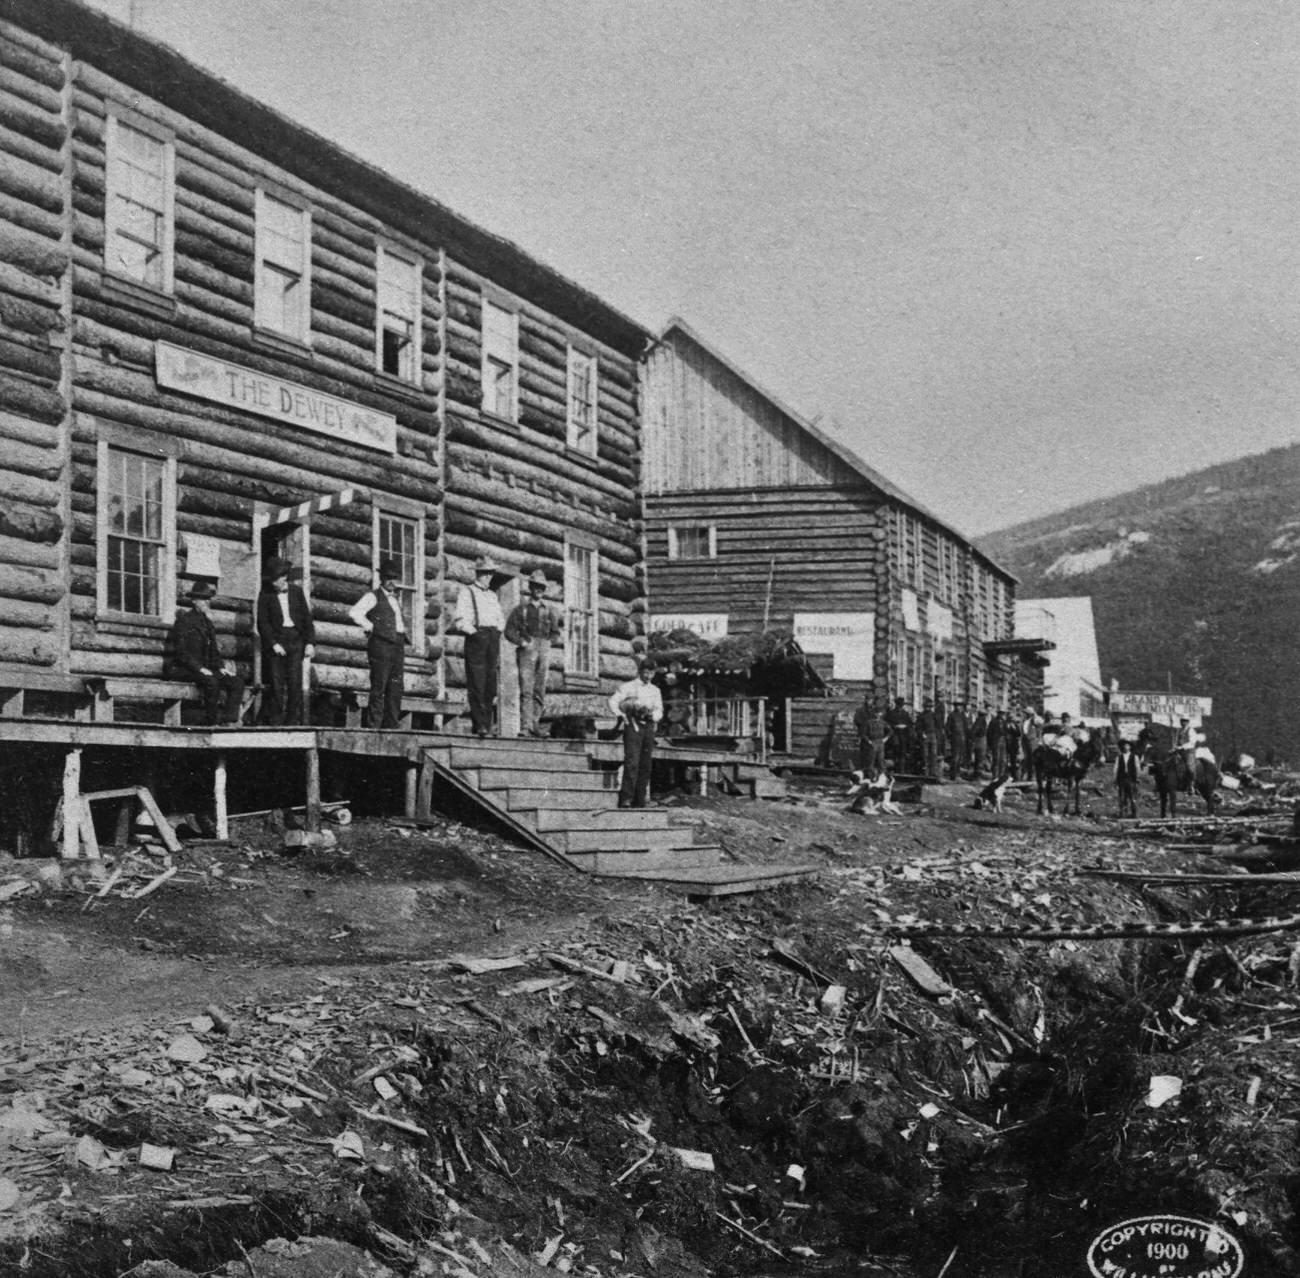 People outside hotels at the Grand Forks of the Eldorado and Bonanza Rivers during the Alaska Gold Rush, 1897.